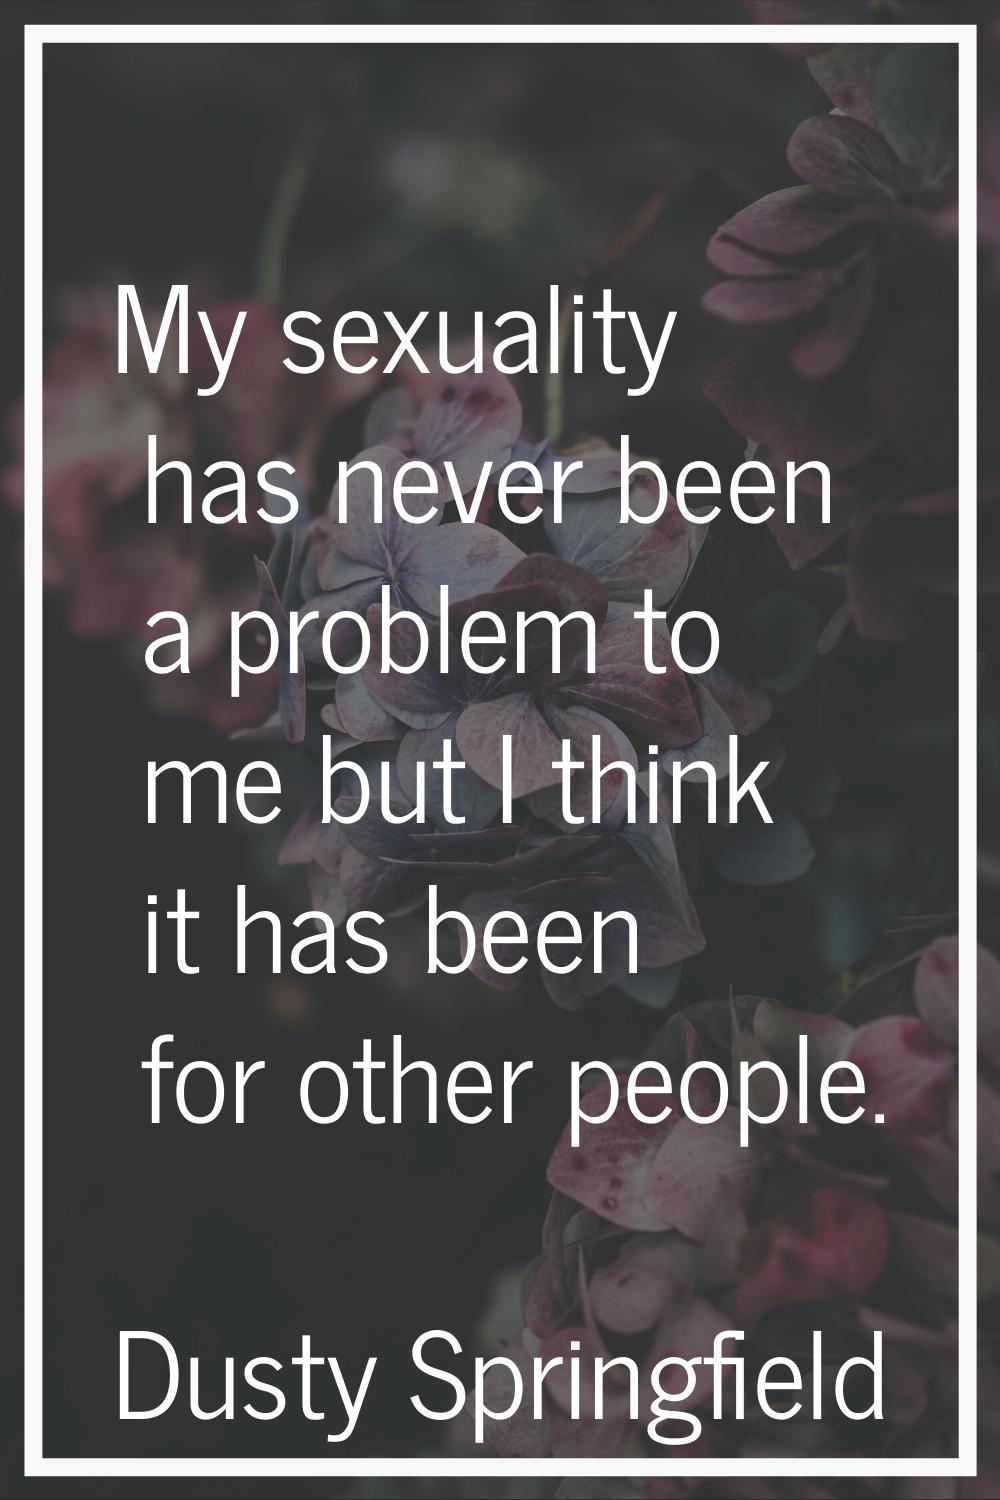 My sexuality has never been a problem to me but I think it has been for other people.